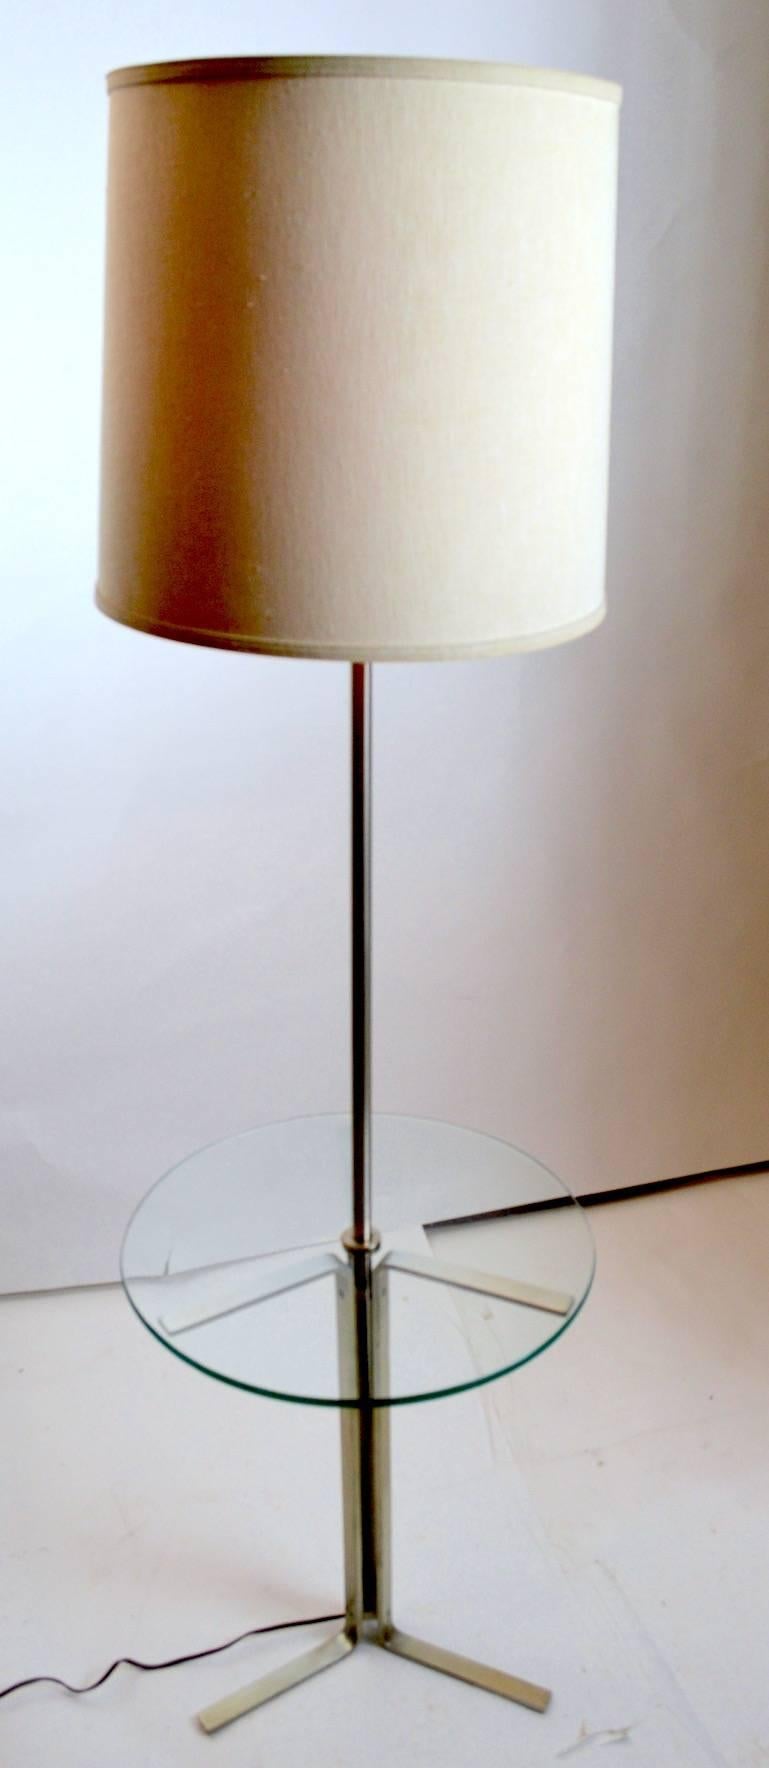 Modernist design and construction combination floor, table lamp. This example has an aluminium frame with a circular plate glass disk table surface. Table surface height 22 inches. Clean, working condition, shade not included.